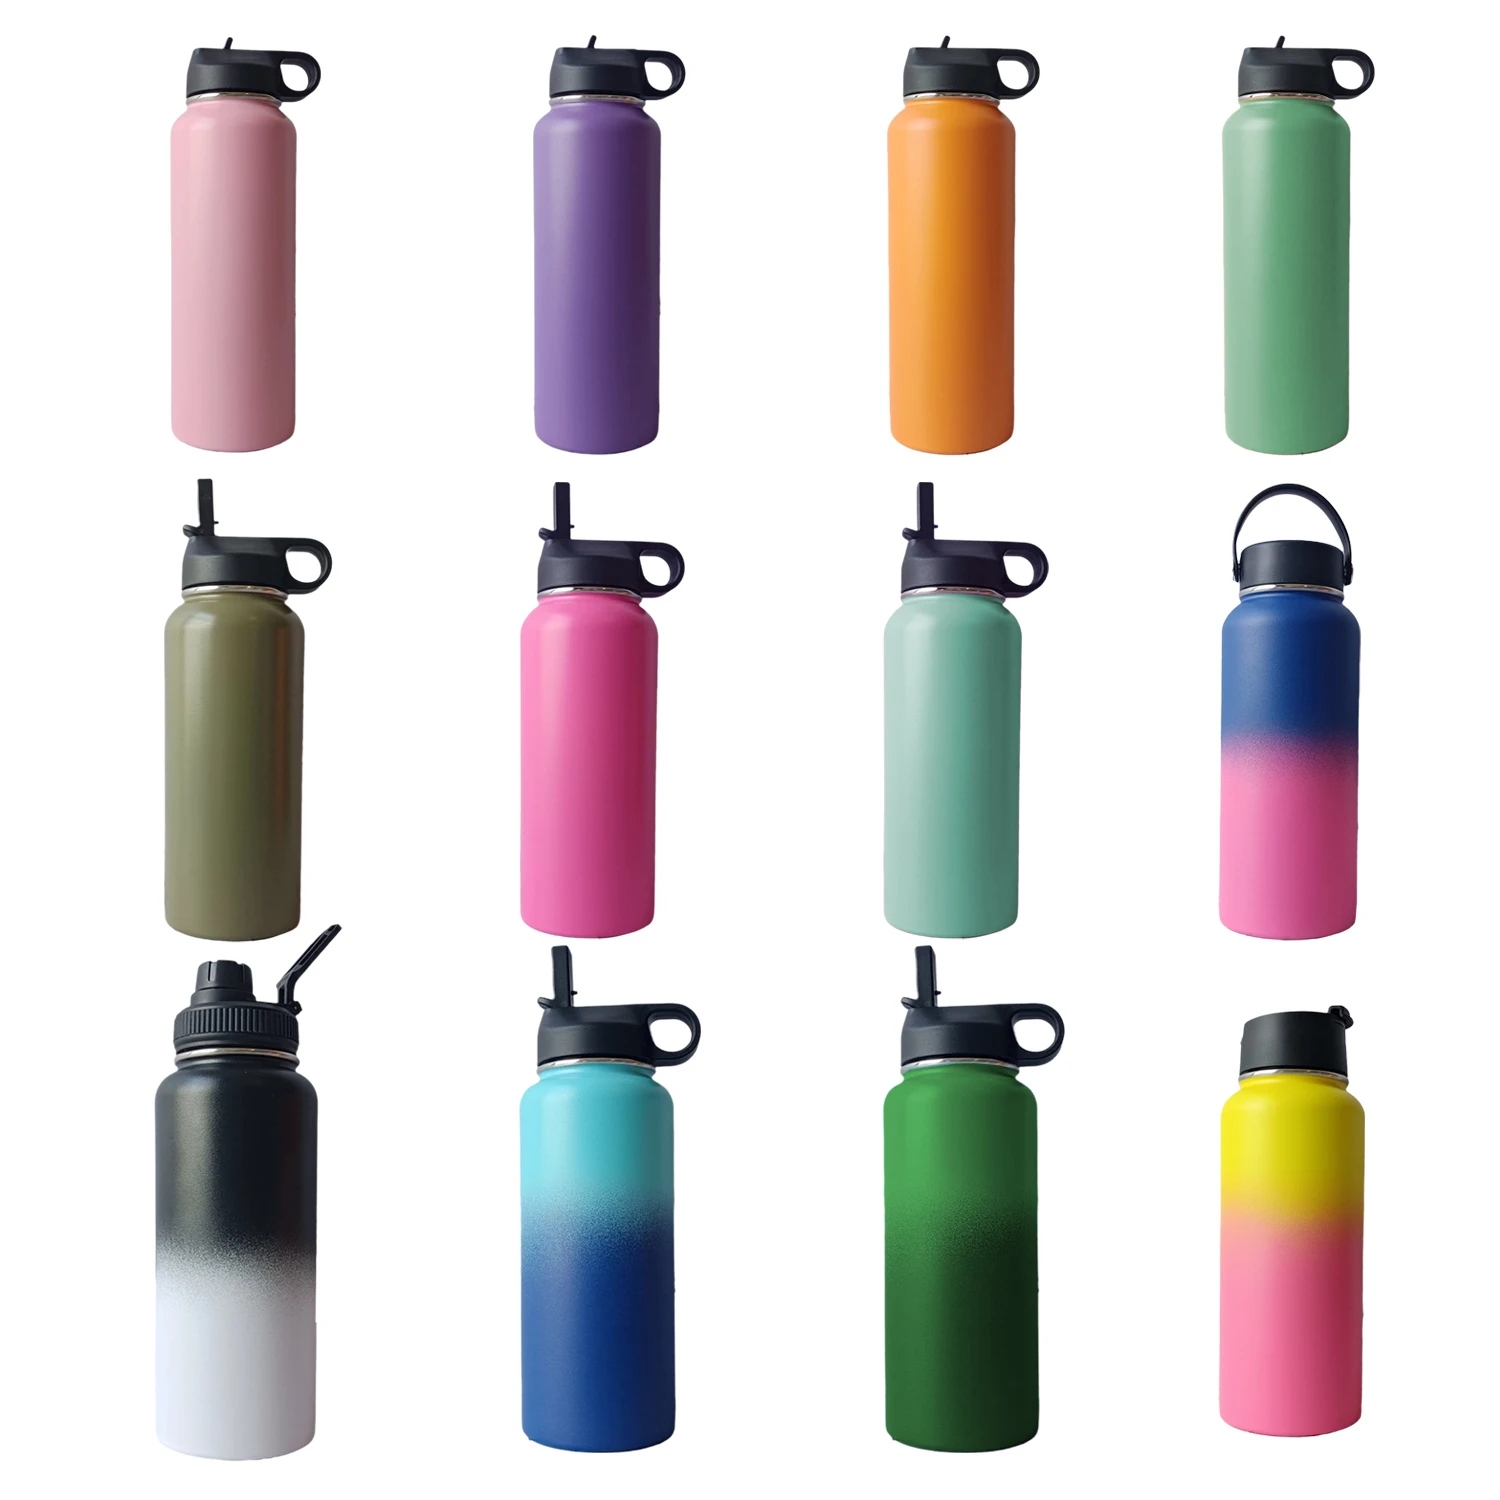 

18oz 32oz 40oz 64oz Double Wall Vacuum Flask Insulated Stainless Steel Water Bottle Thermos Water Bottle Ready To Ship